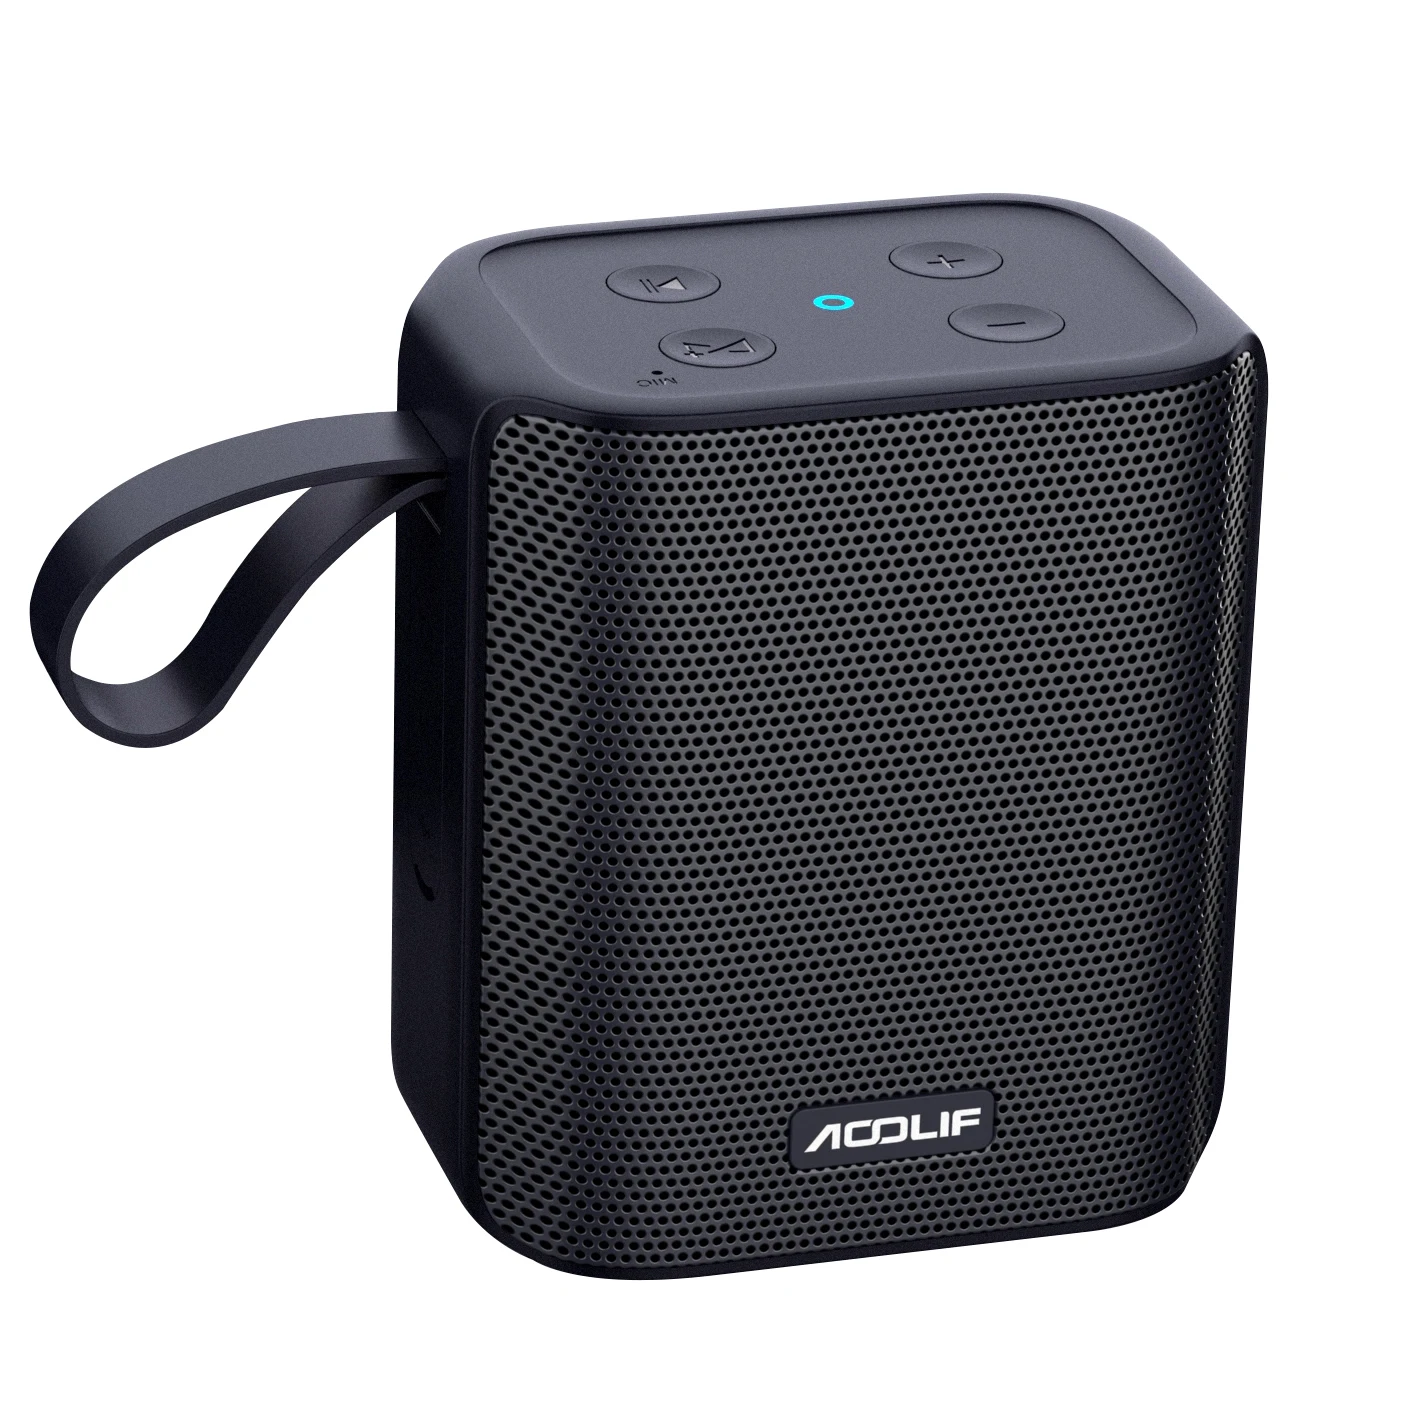 

Hot sale & high quality Portable Usb Wireless Outdoor Waterproof Dj Mini Subwoofer Music Speaker Blue tooth